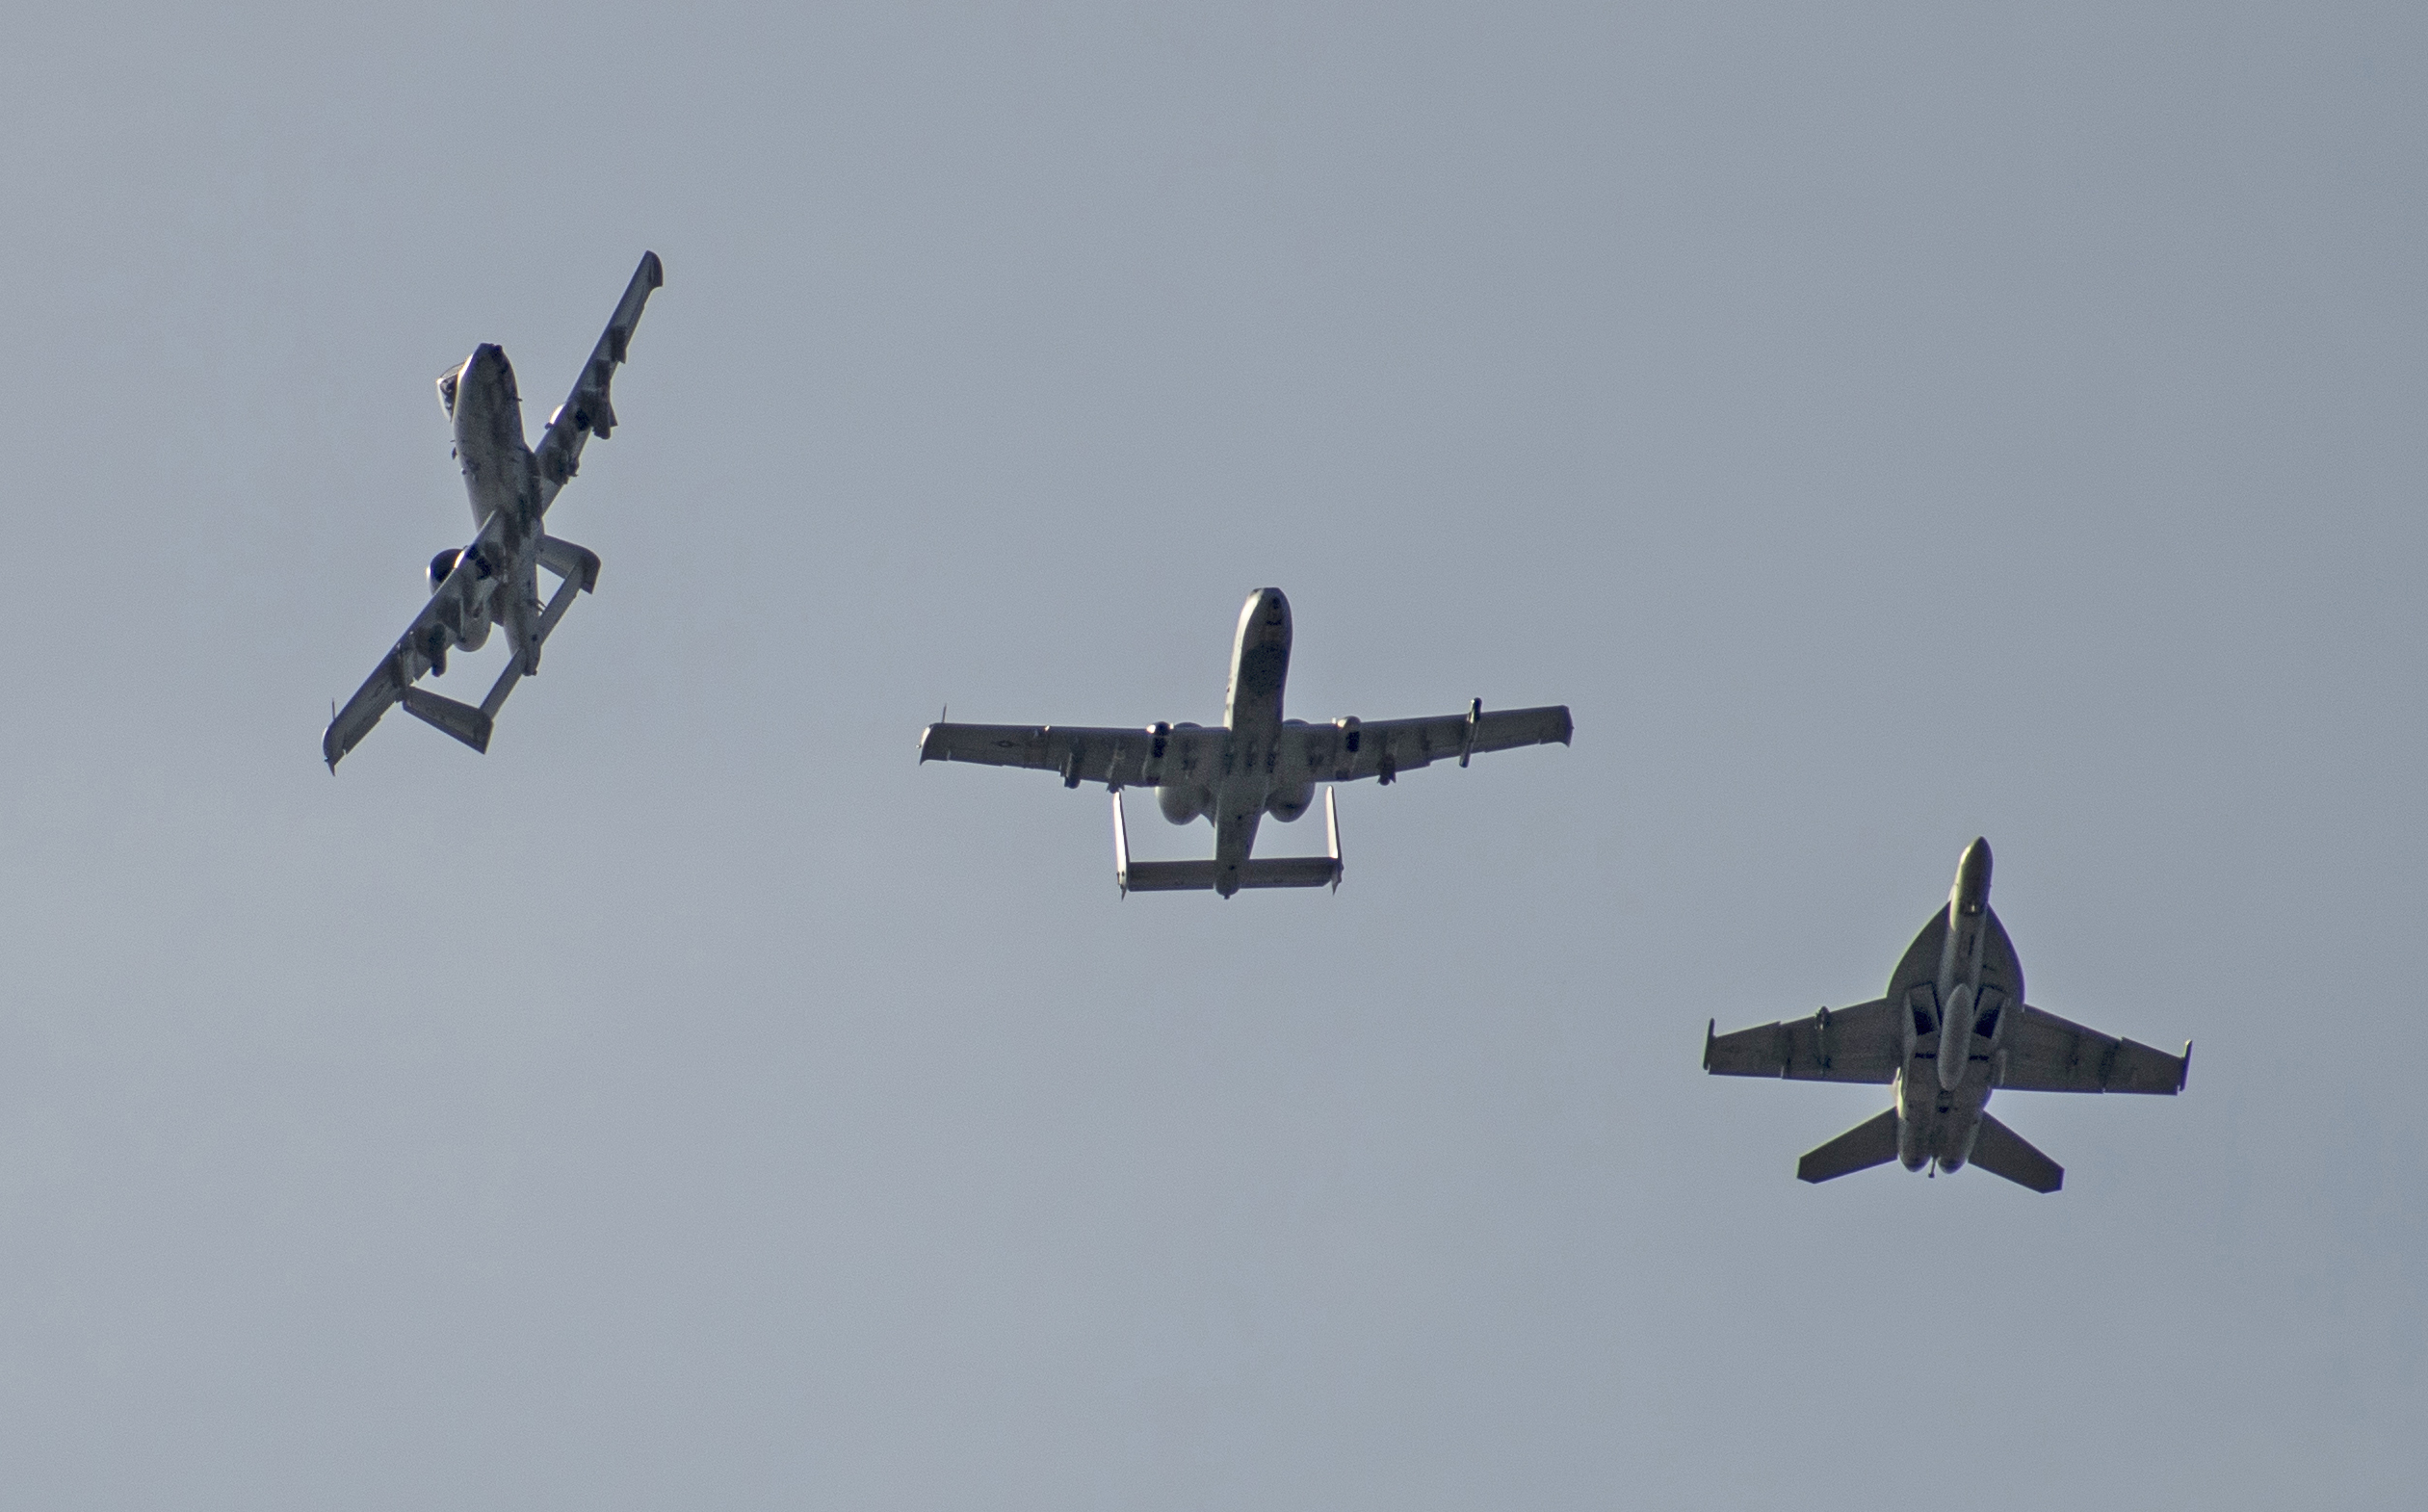 Two A-10 Thunderbolt IIs, from the 190th Fighter Squadron, Boise, Idaho, and an F-18 Super Hornet, based ashore at Naval Air Station Oceana, Virginia Beach, Virginia fly in formation after a training sortie south of Gowen Field, Boise, Idaho on April 25, 2019. The aircraft have been training hand in hand at the Mountain Home Range Complex, Idaho. (U.S. Air National Guard photo by Master Sgt. Joshua C. Allmaras)